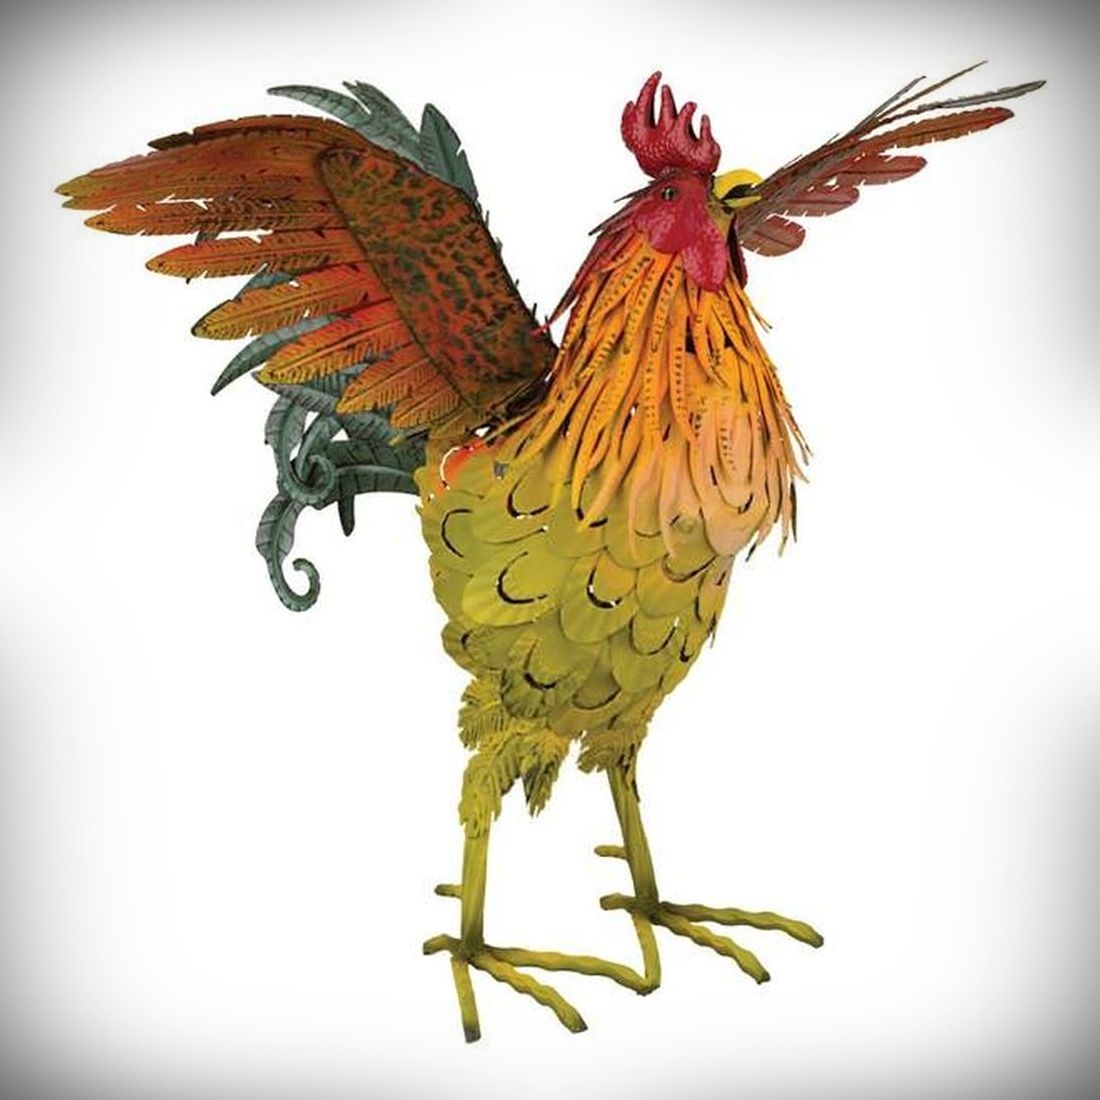 Napa Rooster 3-D Decor Sculpture 21 Inch Wing Up